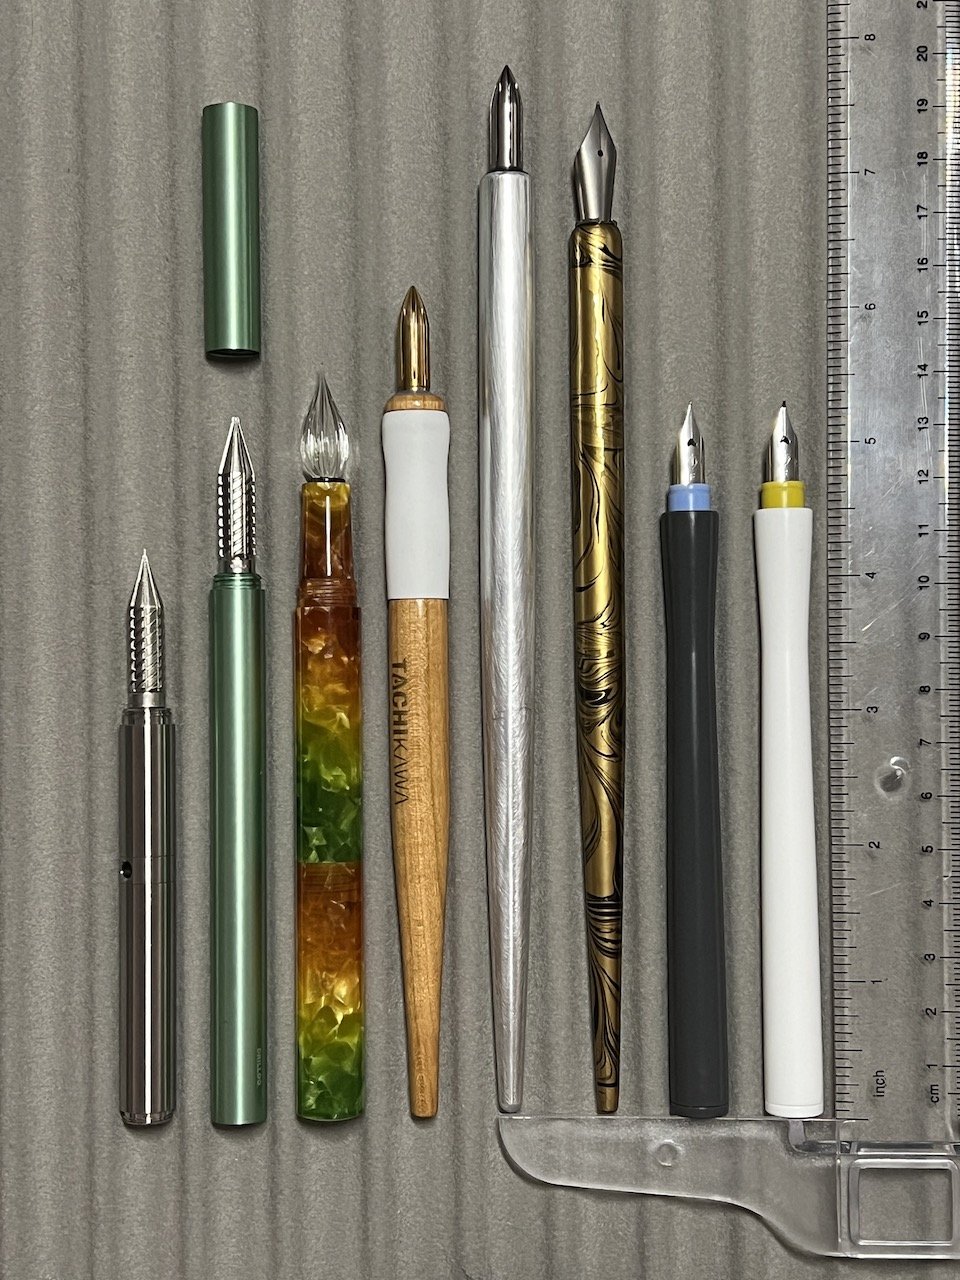 Take-a-Dip Glass Pen, Create the finest lines